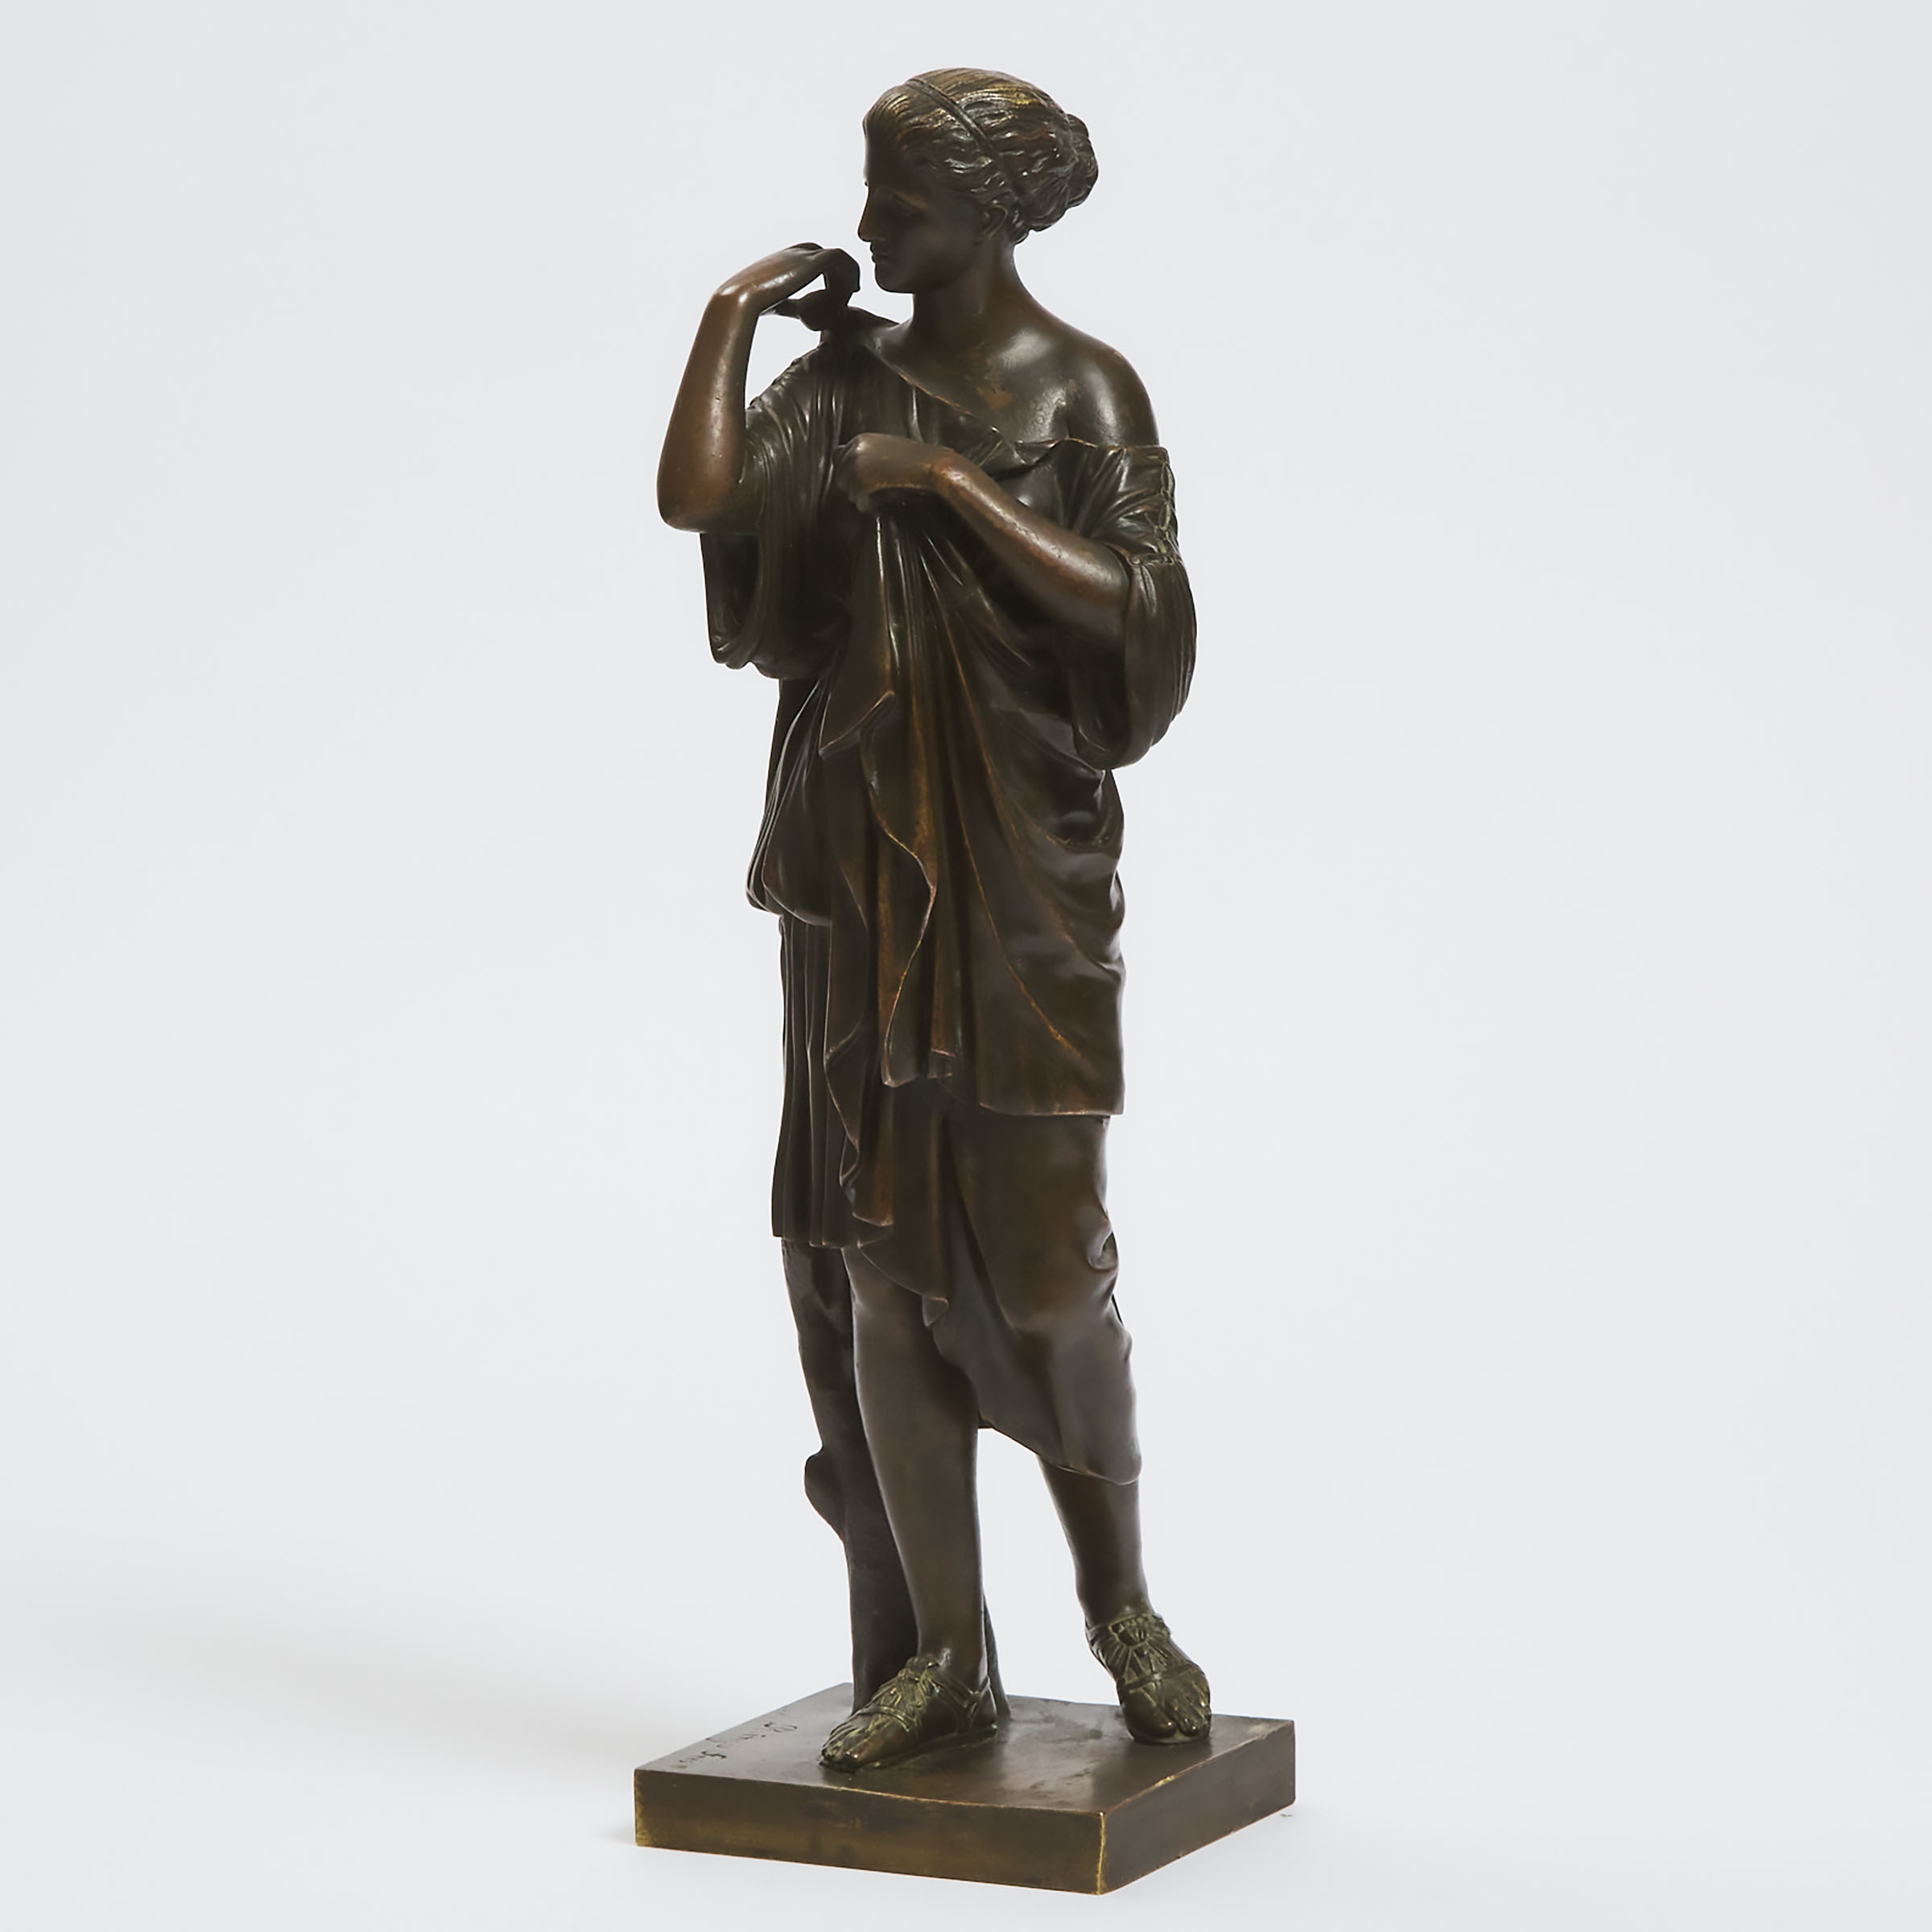 French Patinated Bronze Figure of a Classical Woman, Raingo Frères, Paris, 19th century